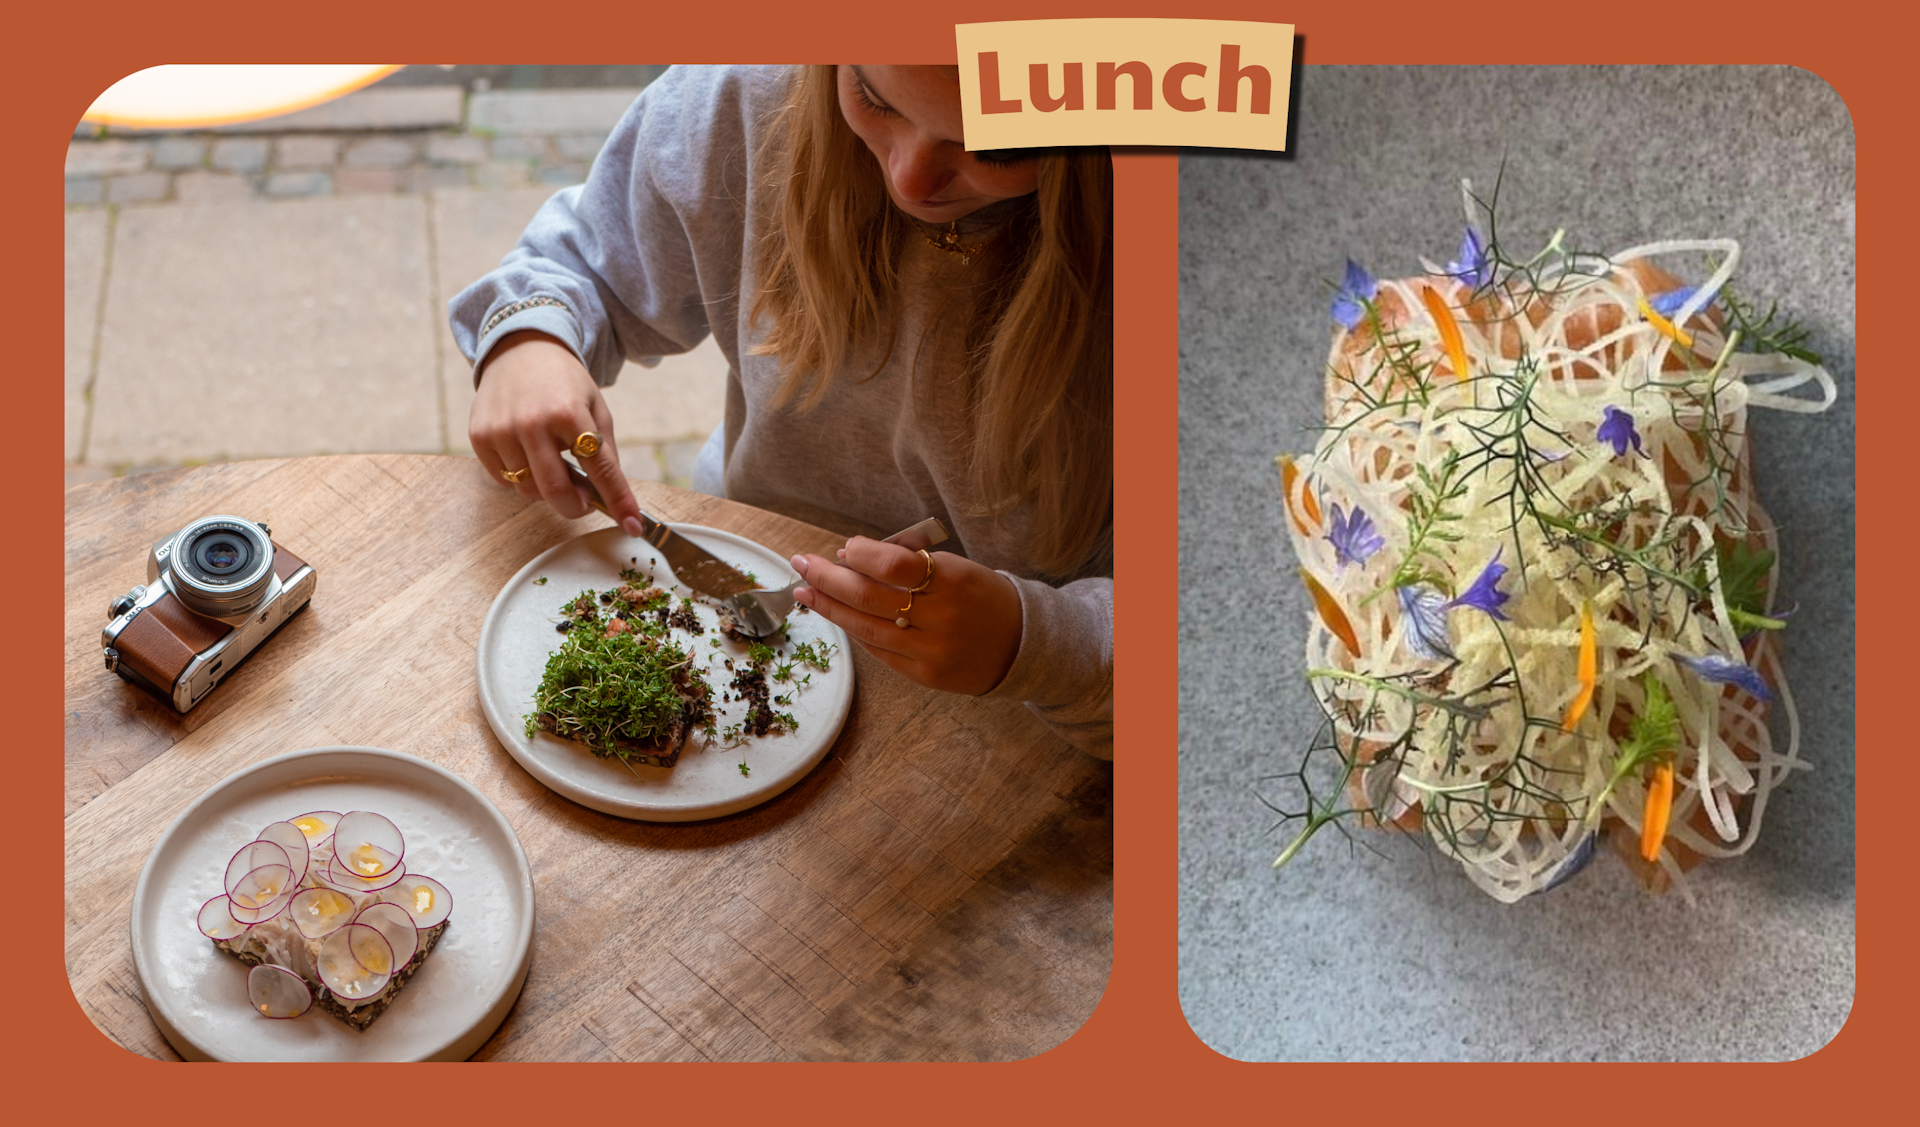 The left image shows a young woman tucking into a Danish open sandwich. The right image shows a close-up of a herring dish at Selma